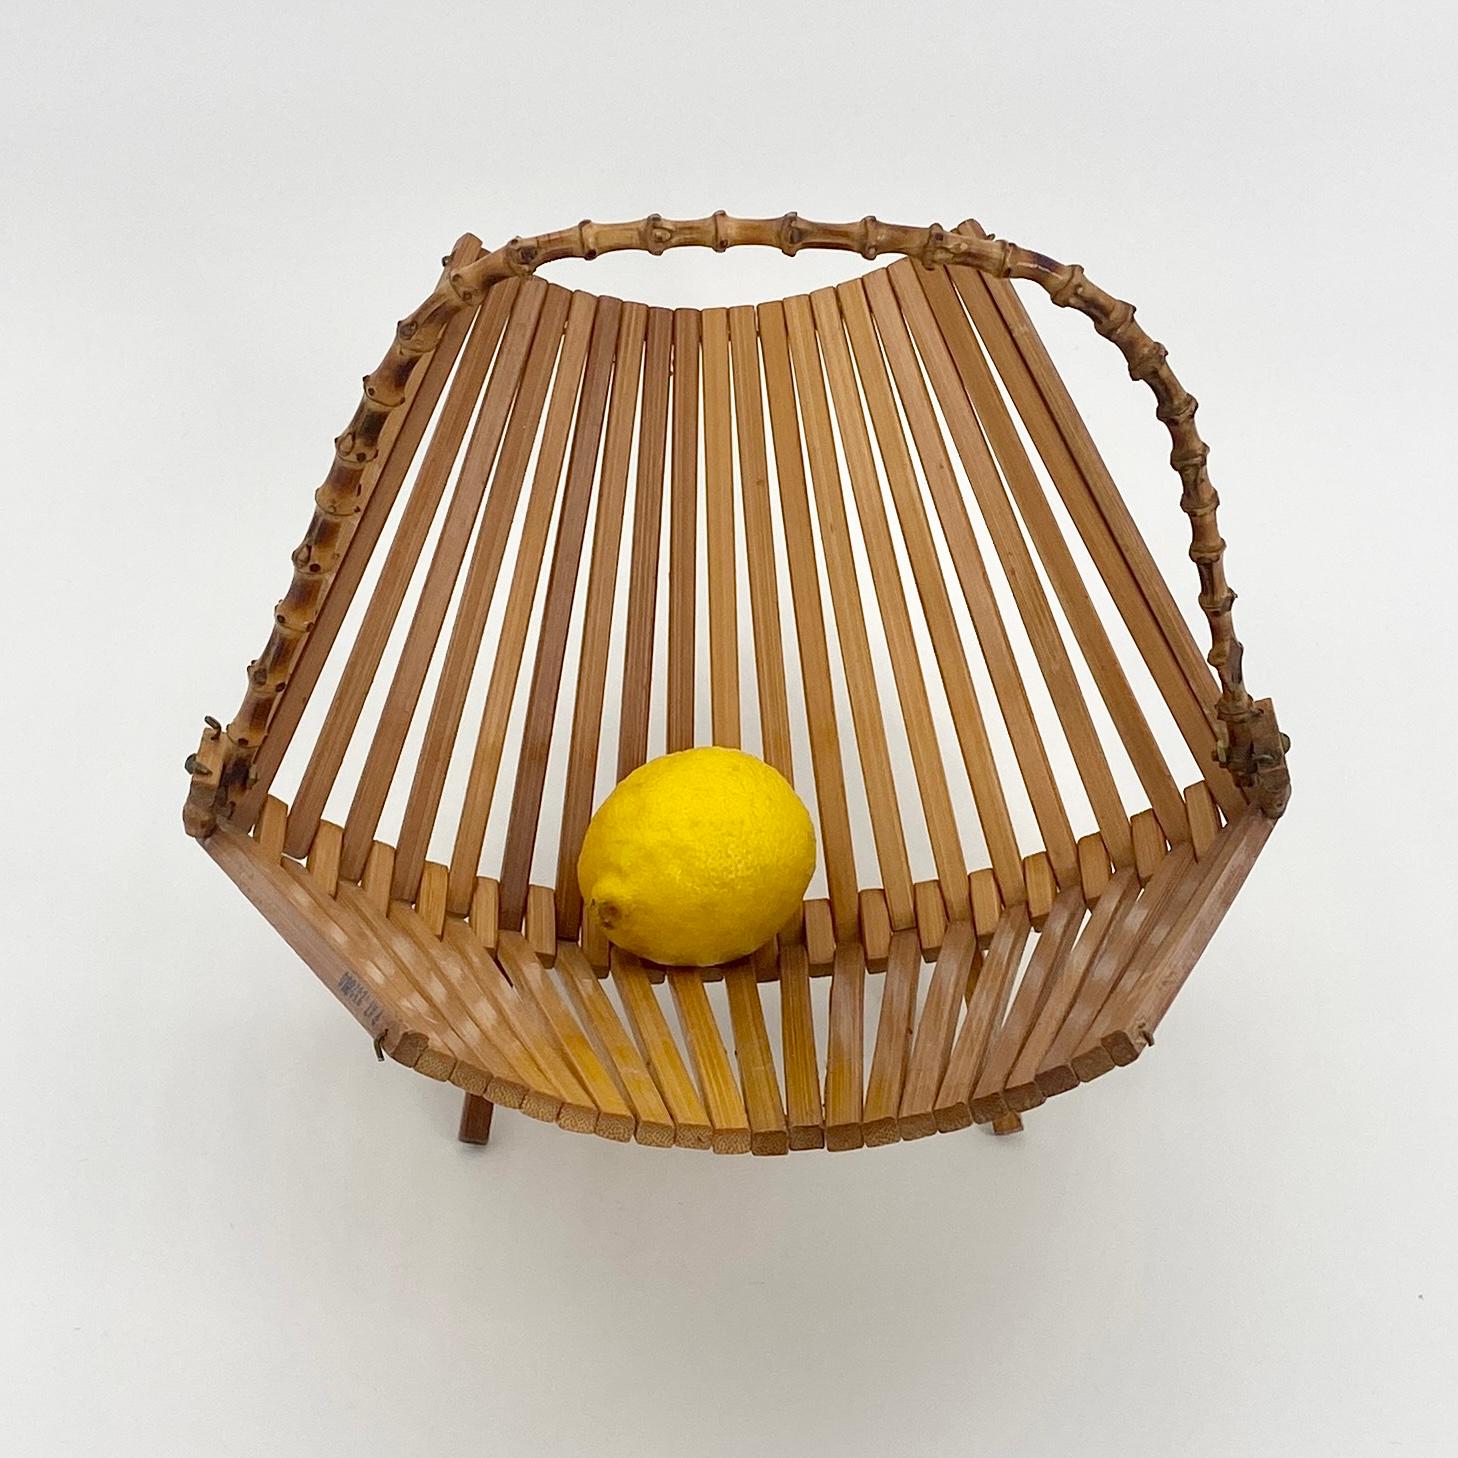 Architectural Bread or Fruit Kitchen Basket with Bamboo Handle, Denmark 3